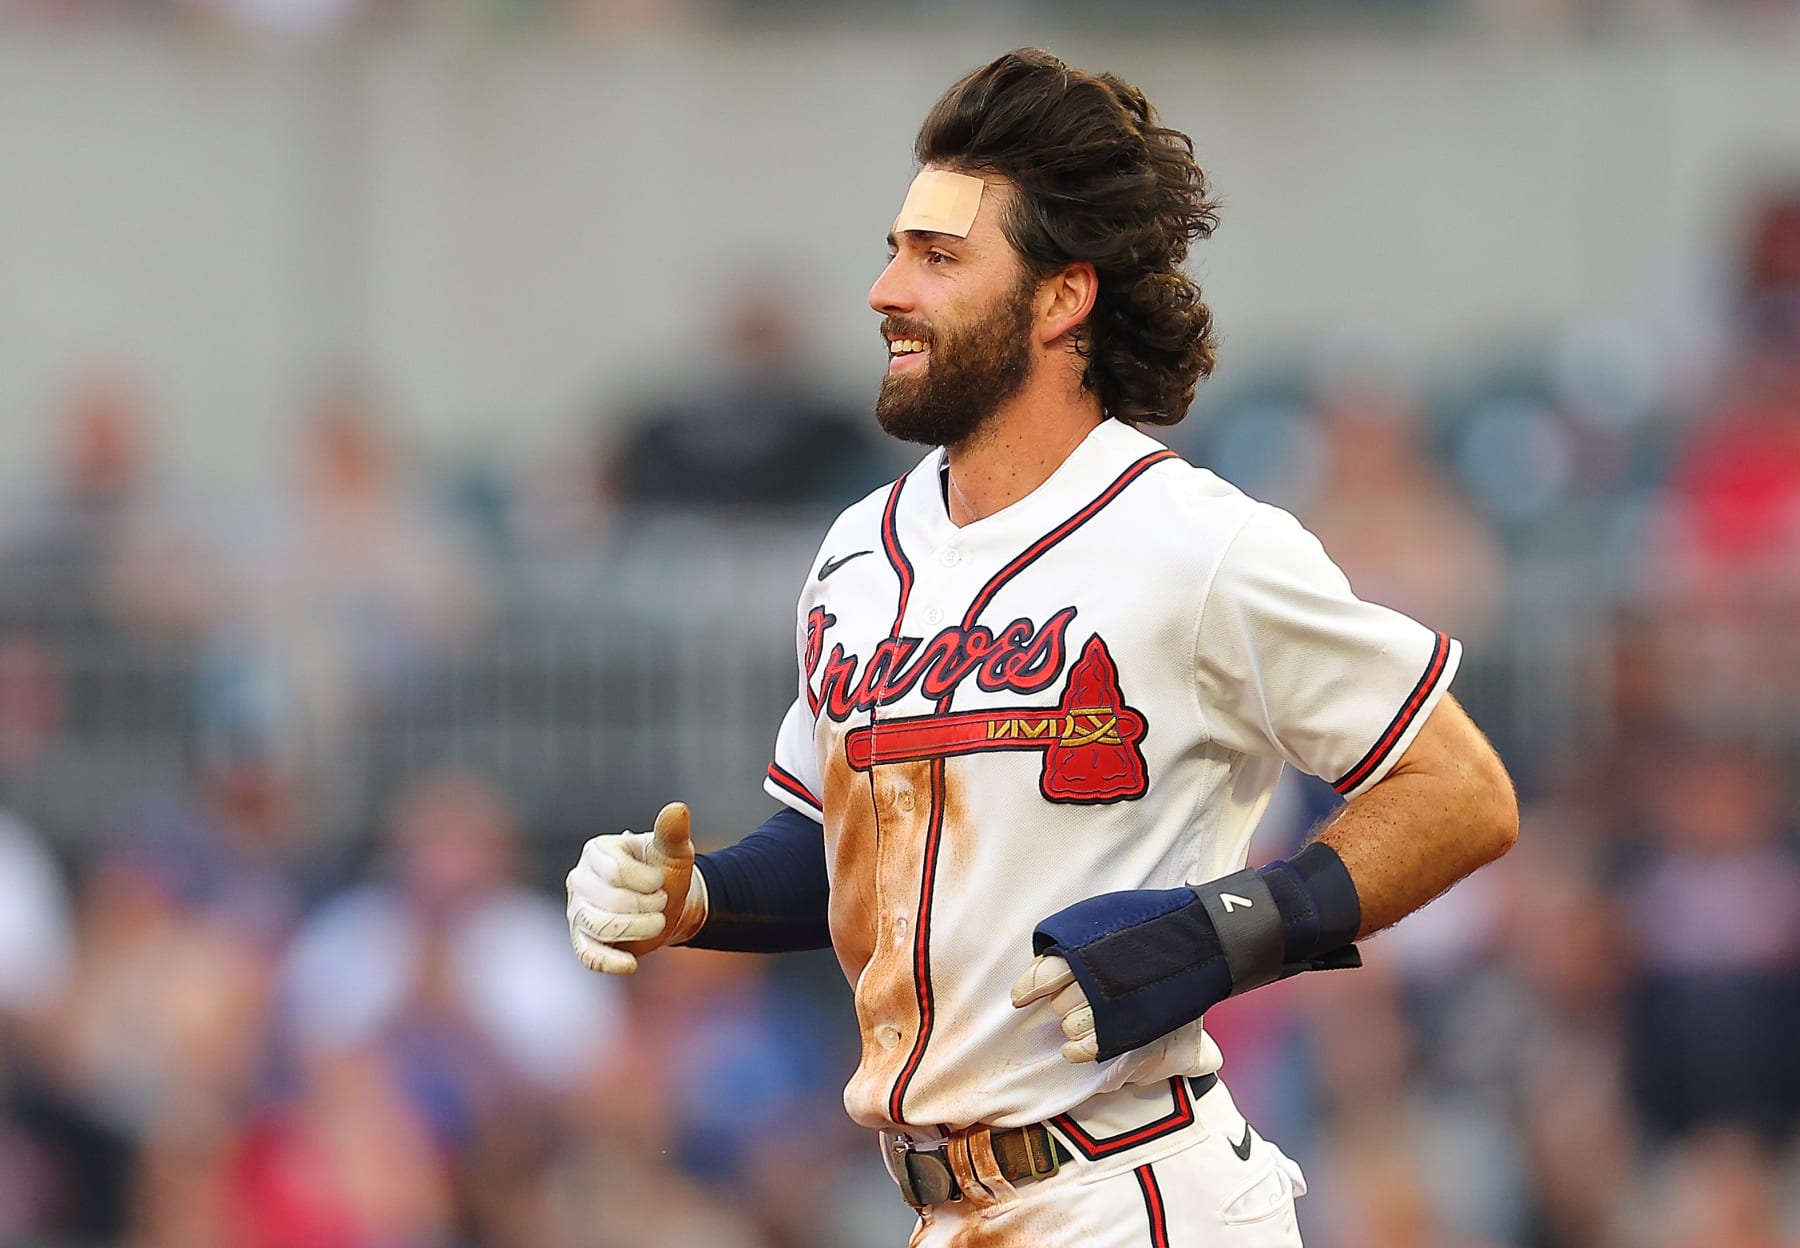 Cubs News: Dansby Swanson named a top-ten shortstop